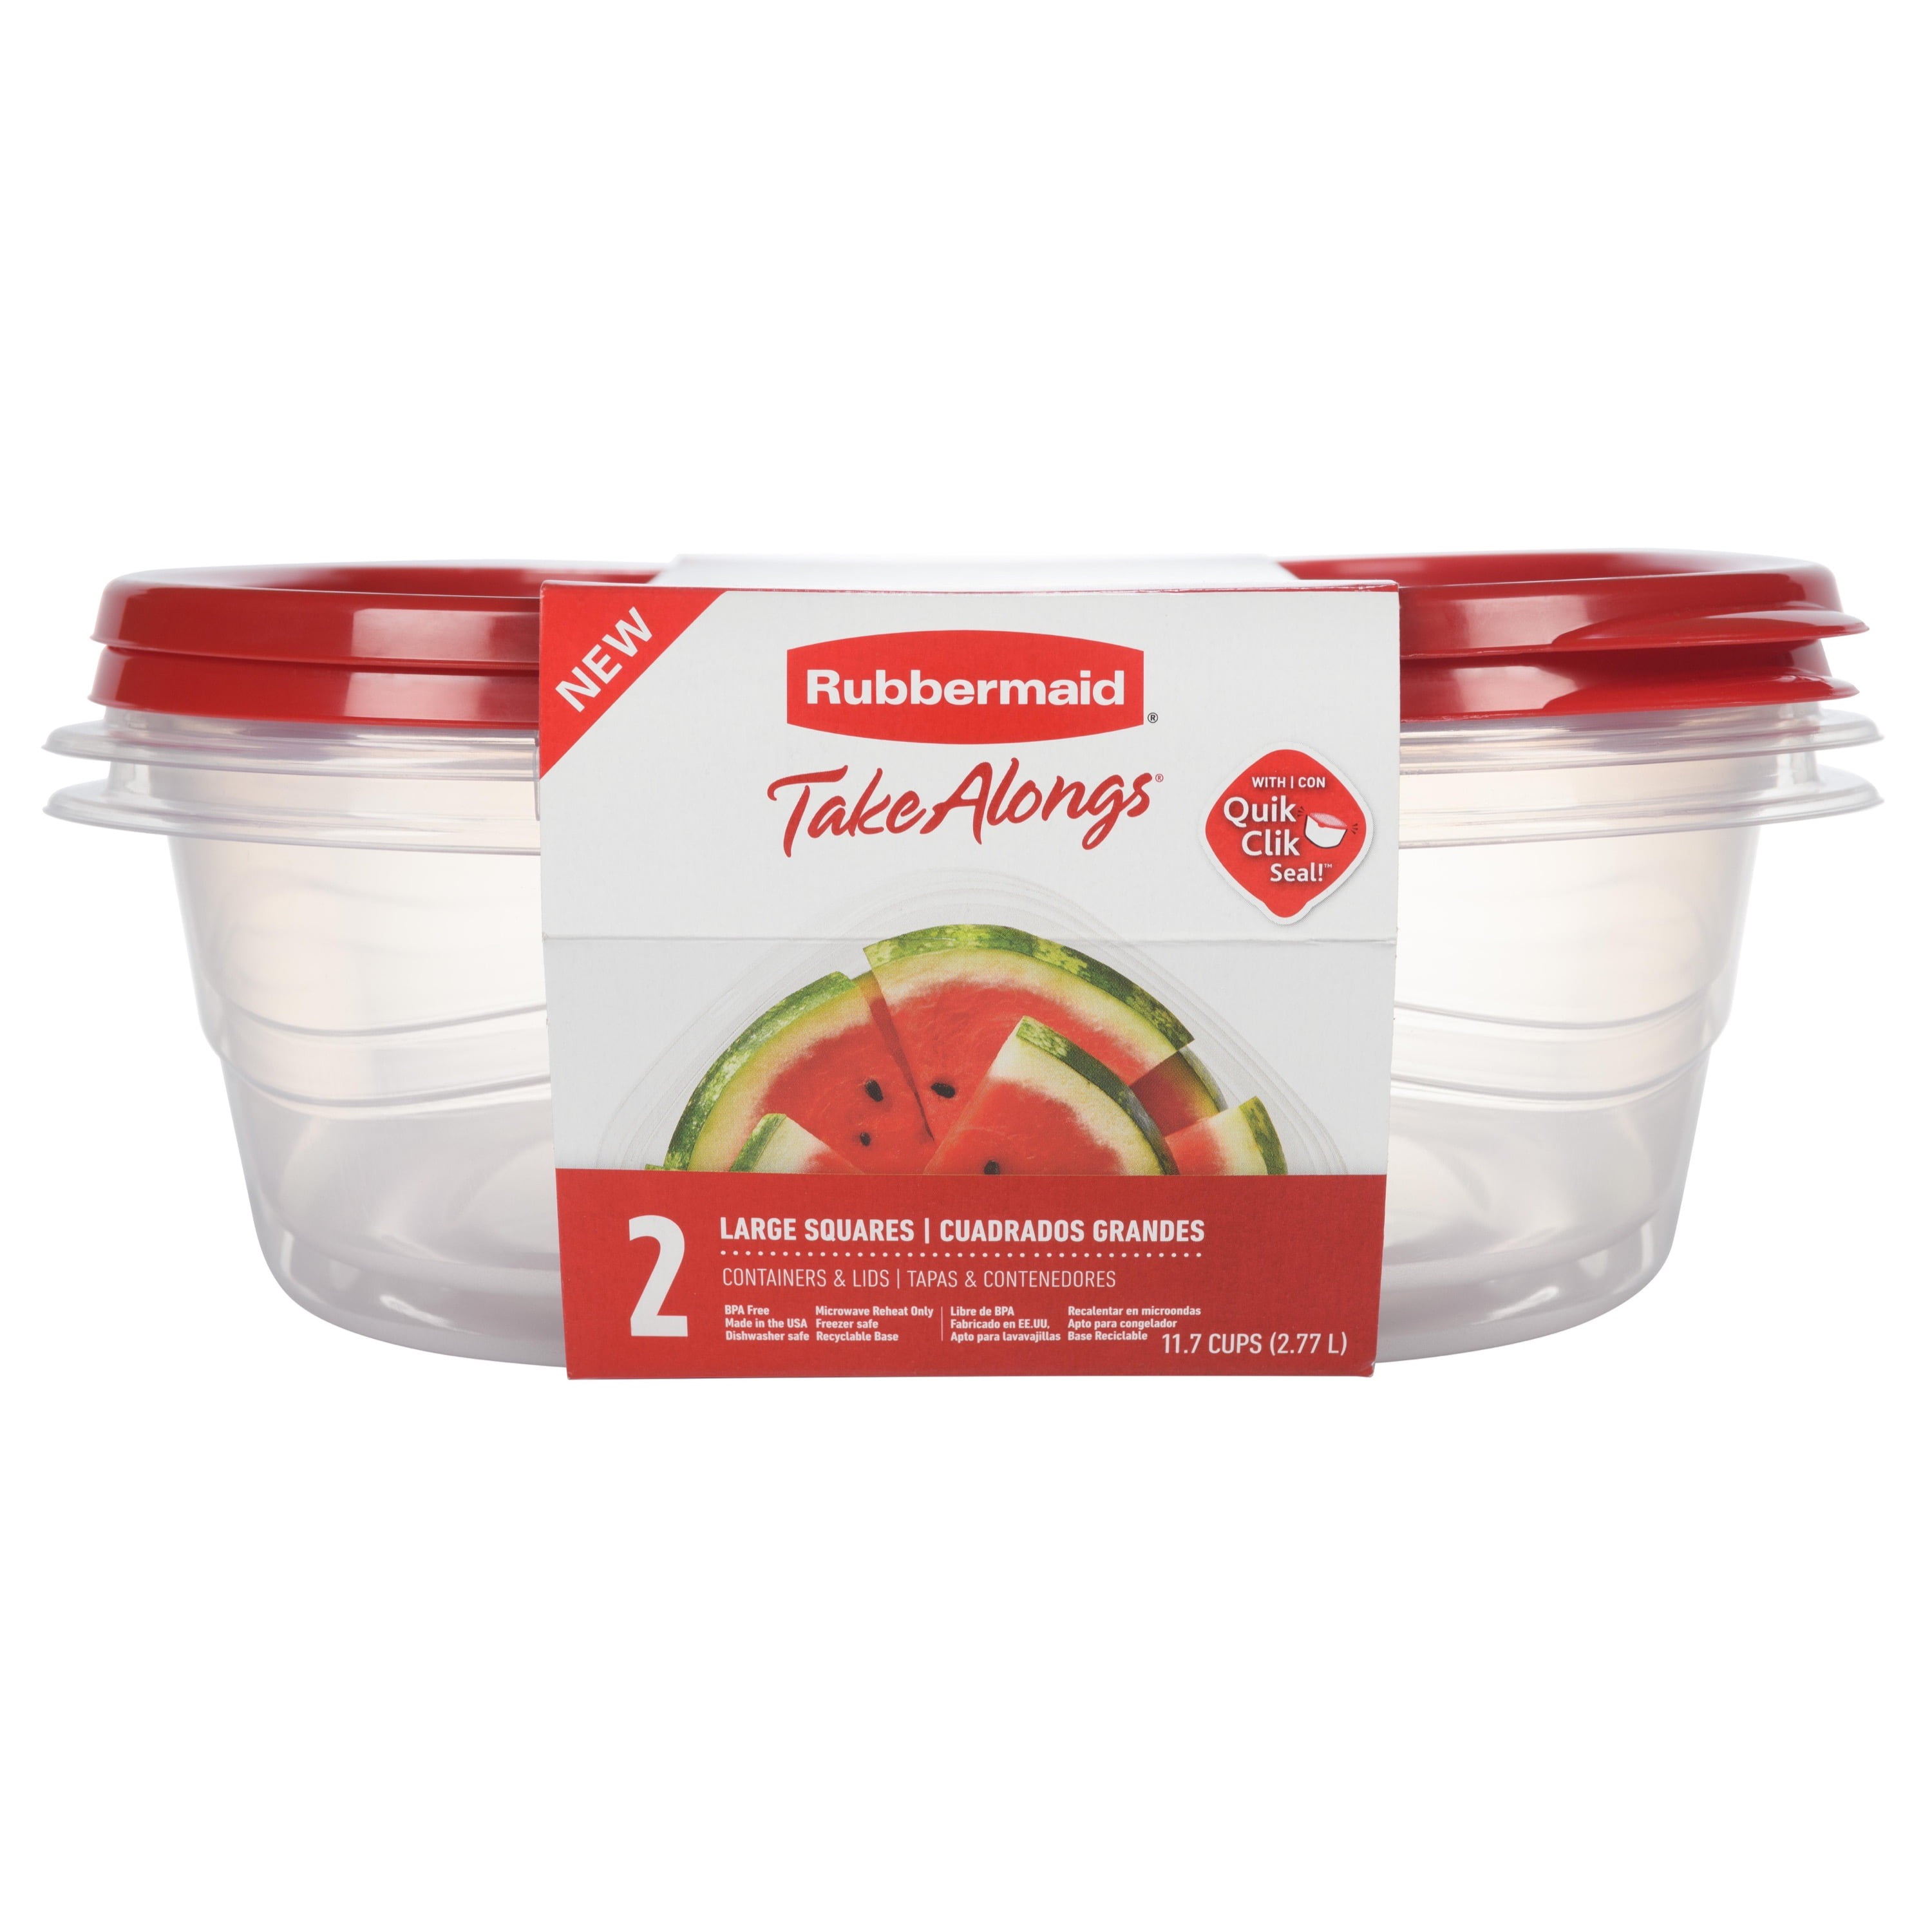 Rubbermaid TakeAlongs 11.7 Cup Food Storage Containers, Set of 2, Red